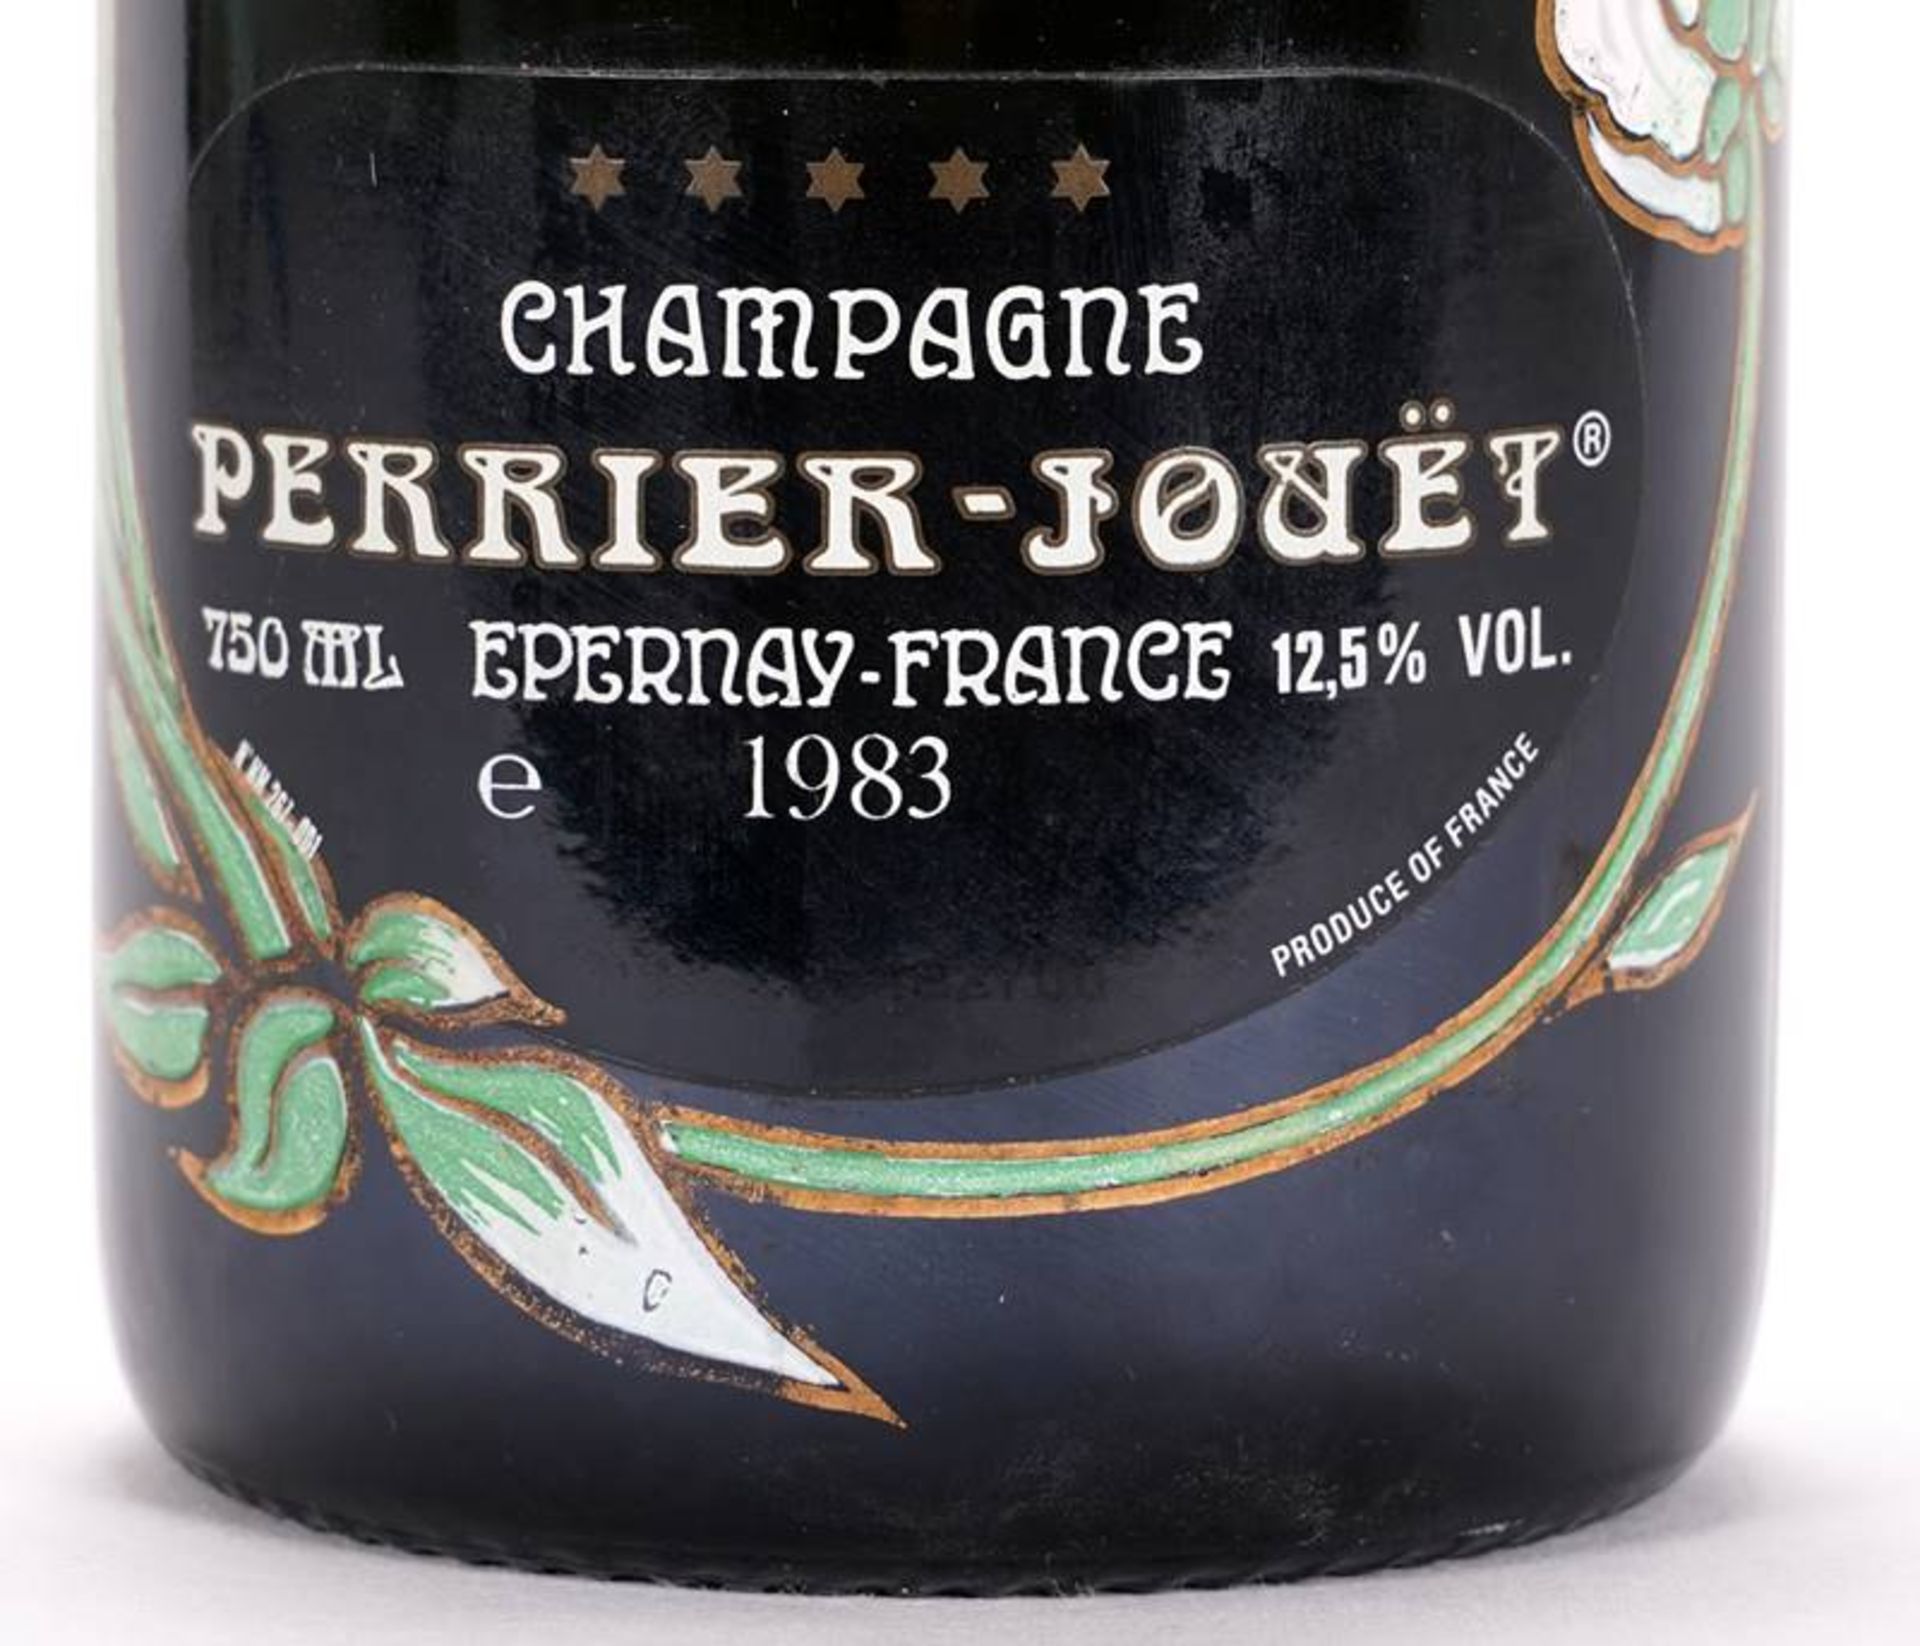 1 bottle Perrier-Jouet Champagne - Image 2 of 5